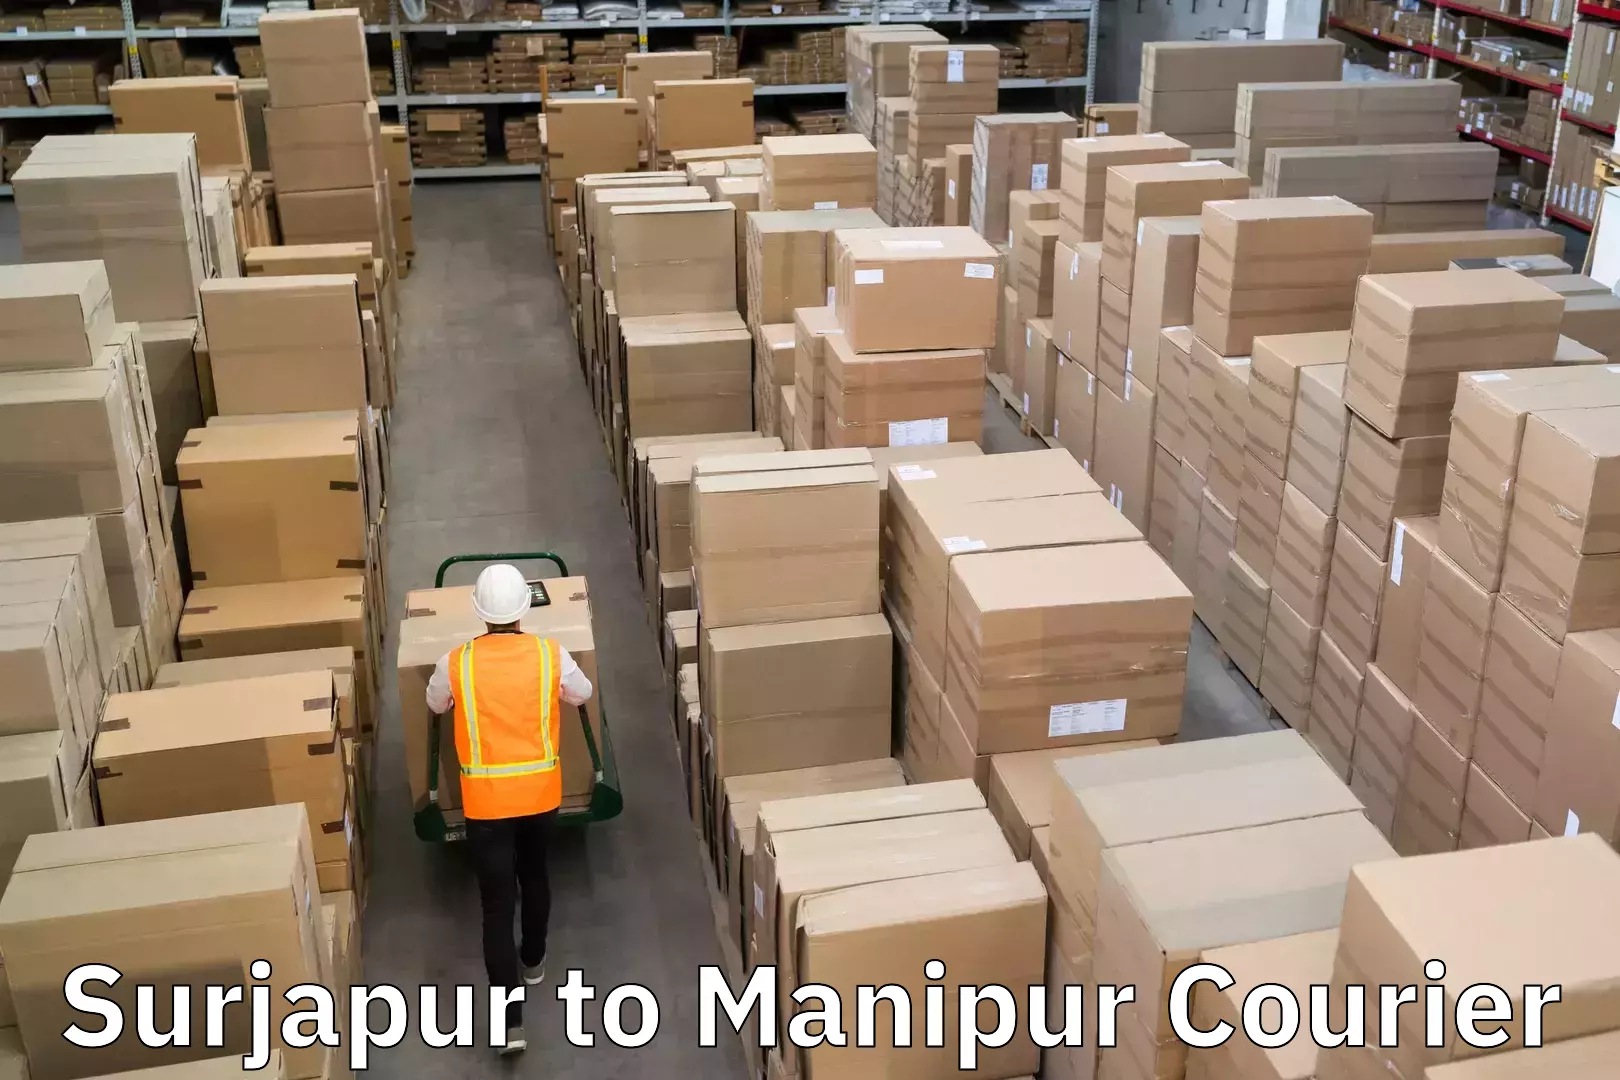 Ground shipping in Surjapur to Manipur